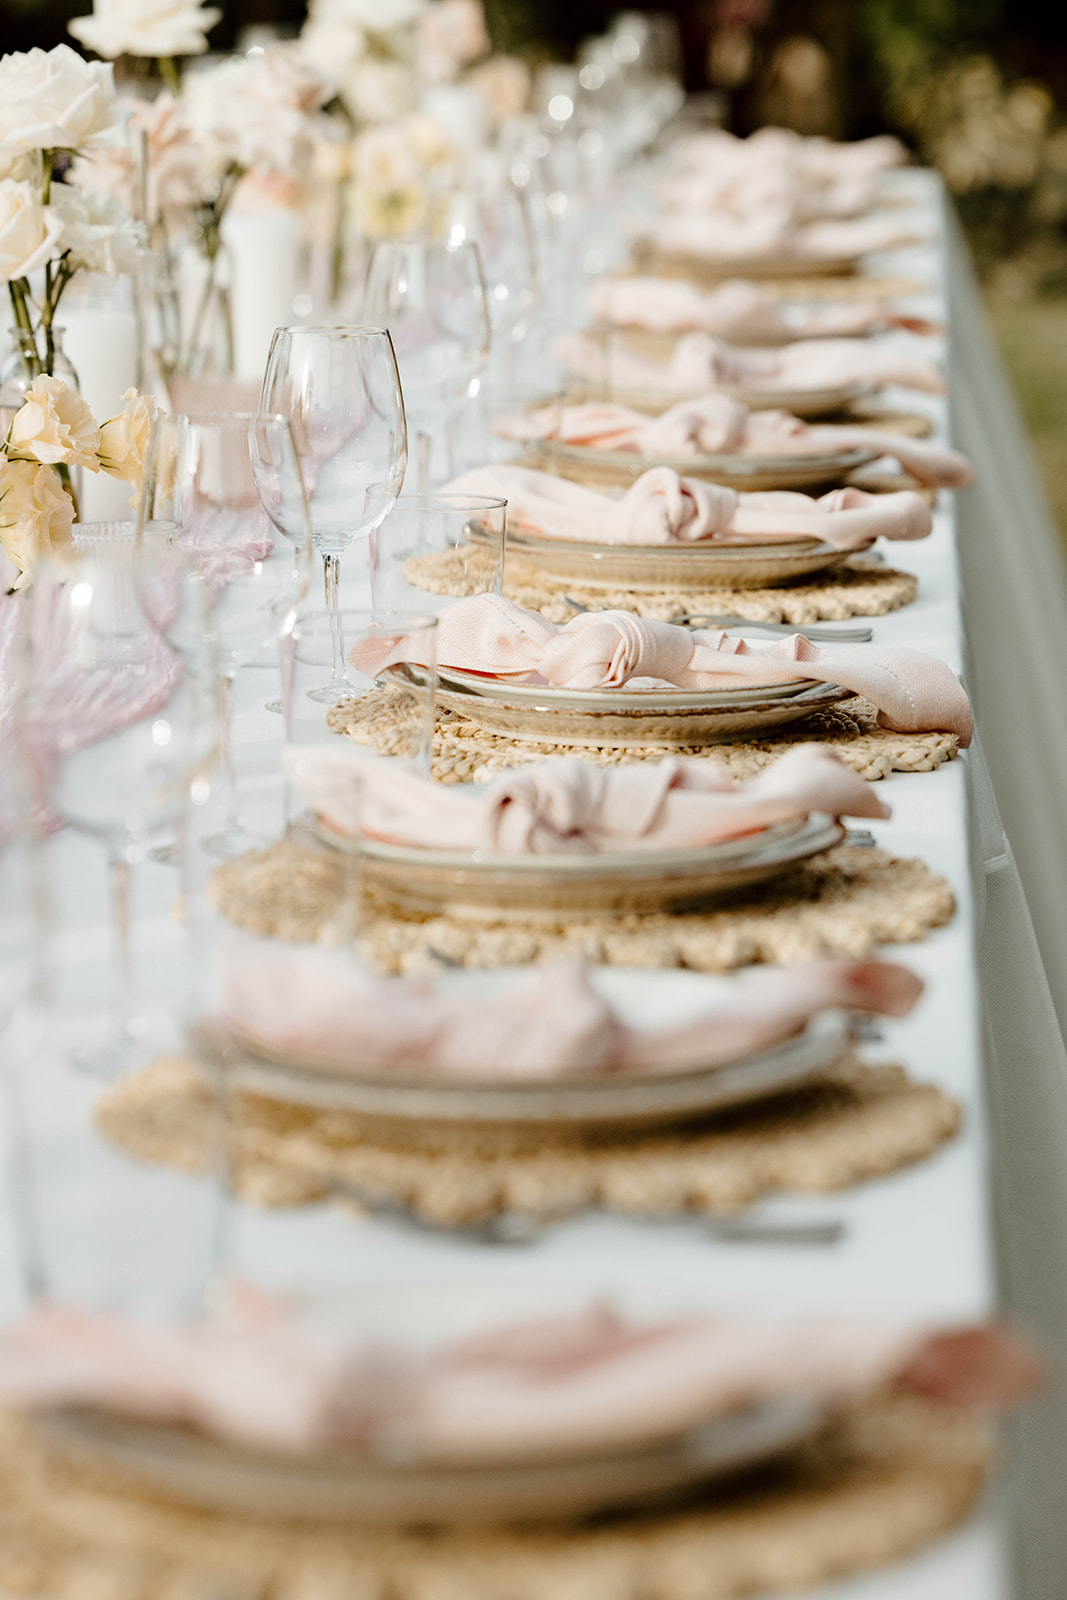 Elegant table setting with pink napkins and rustic plate chargers for a cabo san lucas wedding